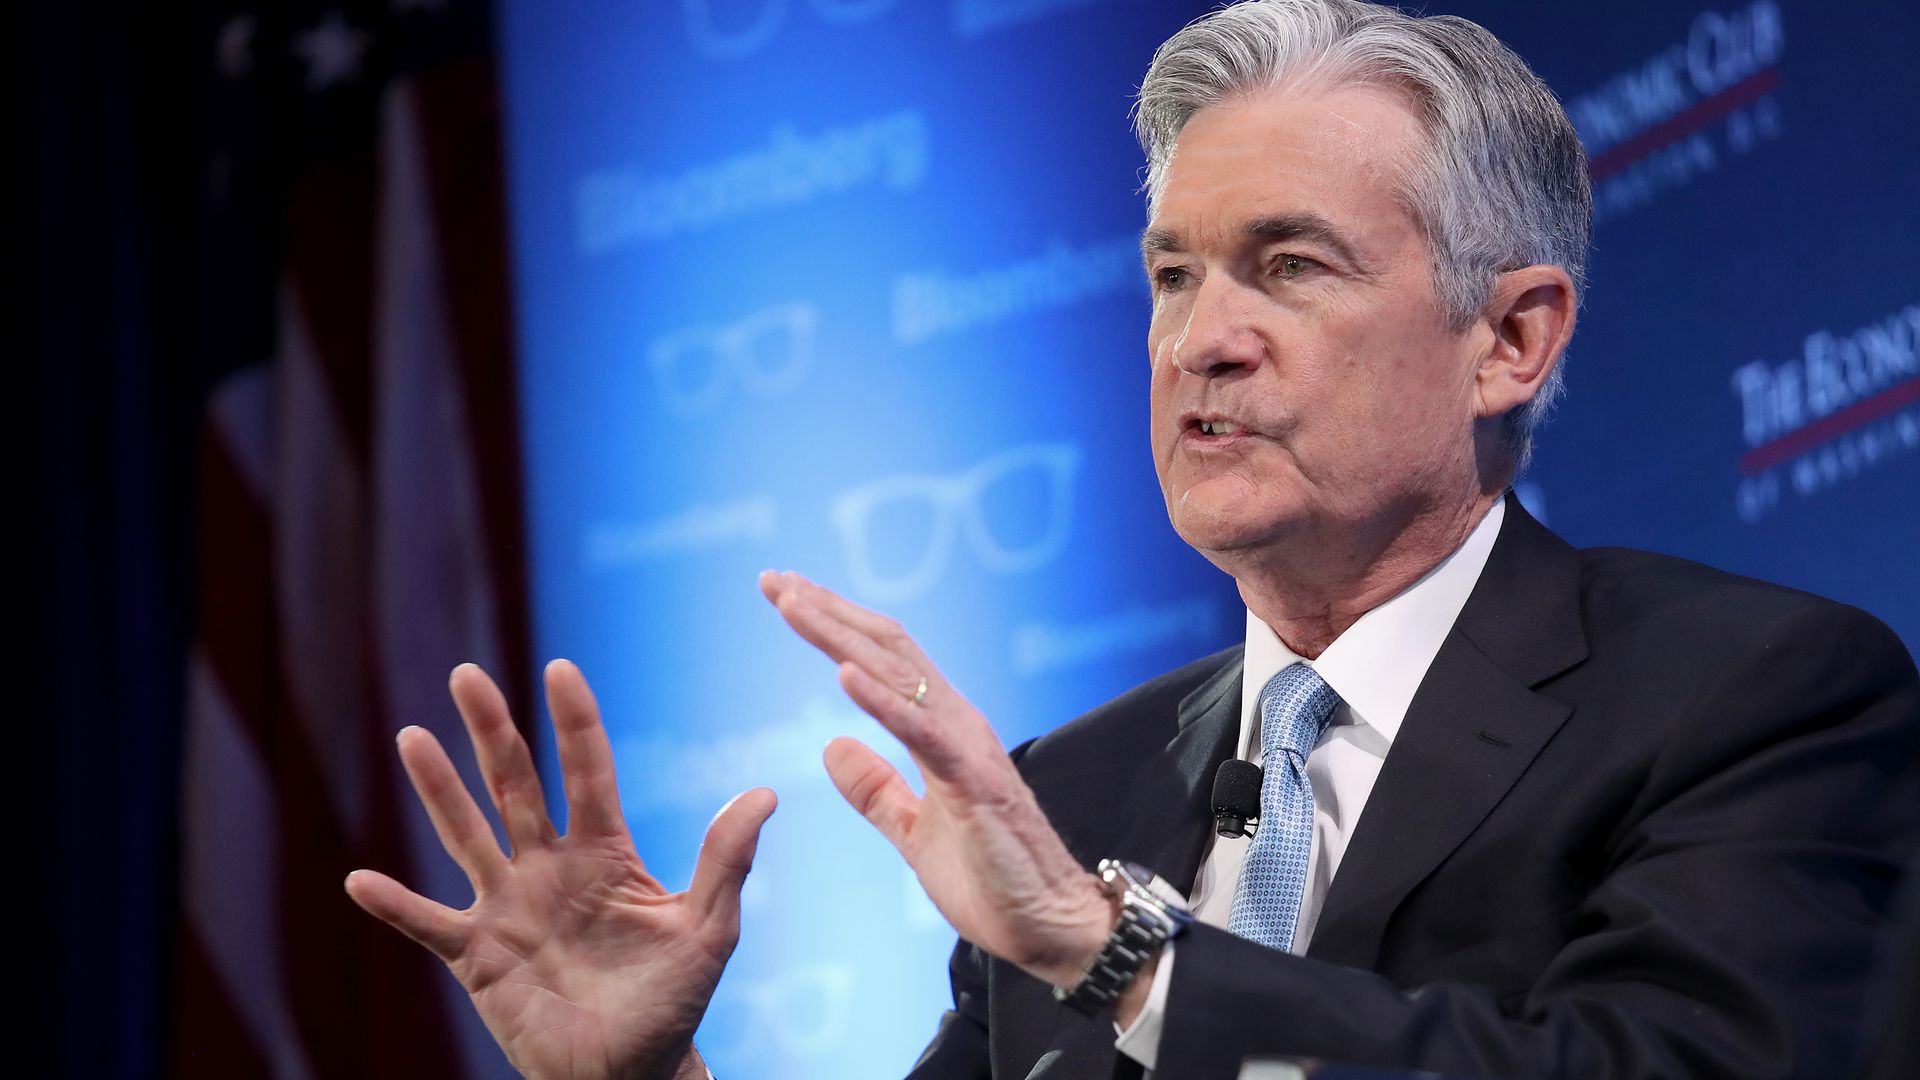 Fed chair Jerome Powell speaks at the Economic Club of Washington 